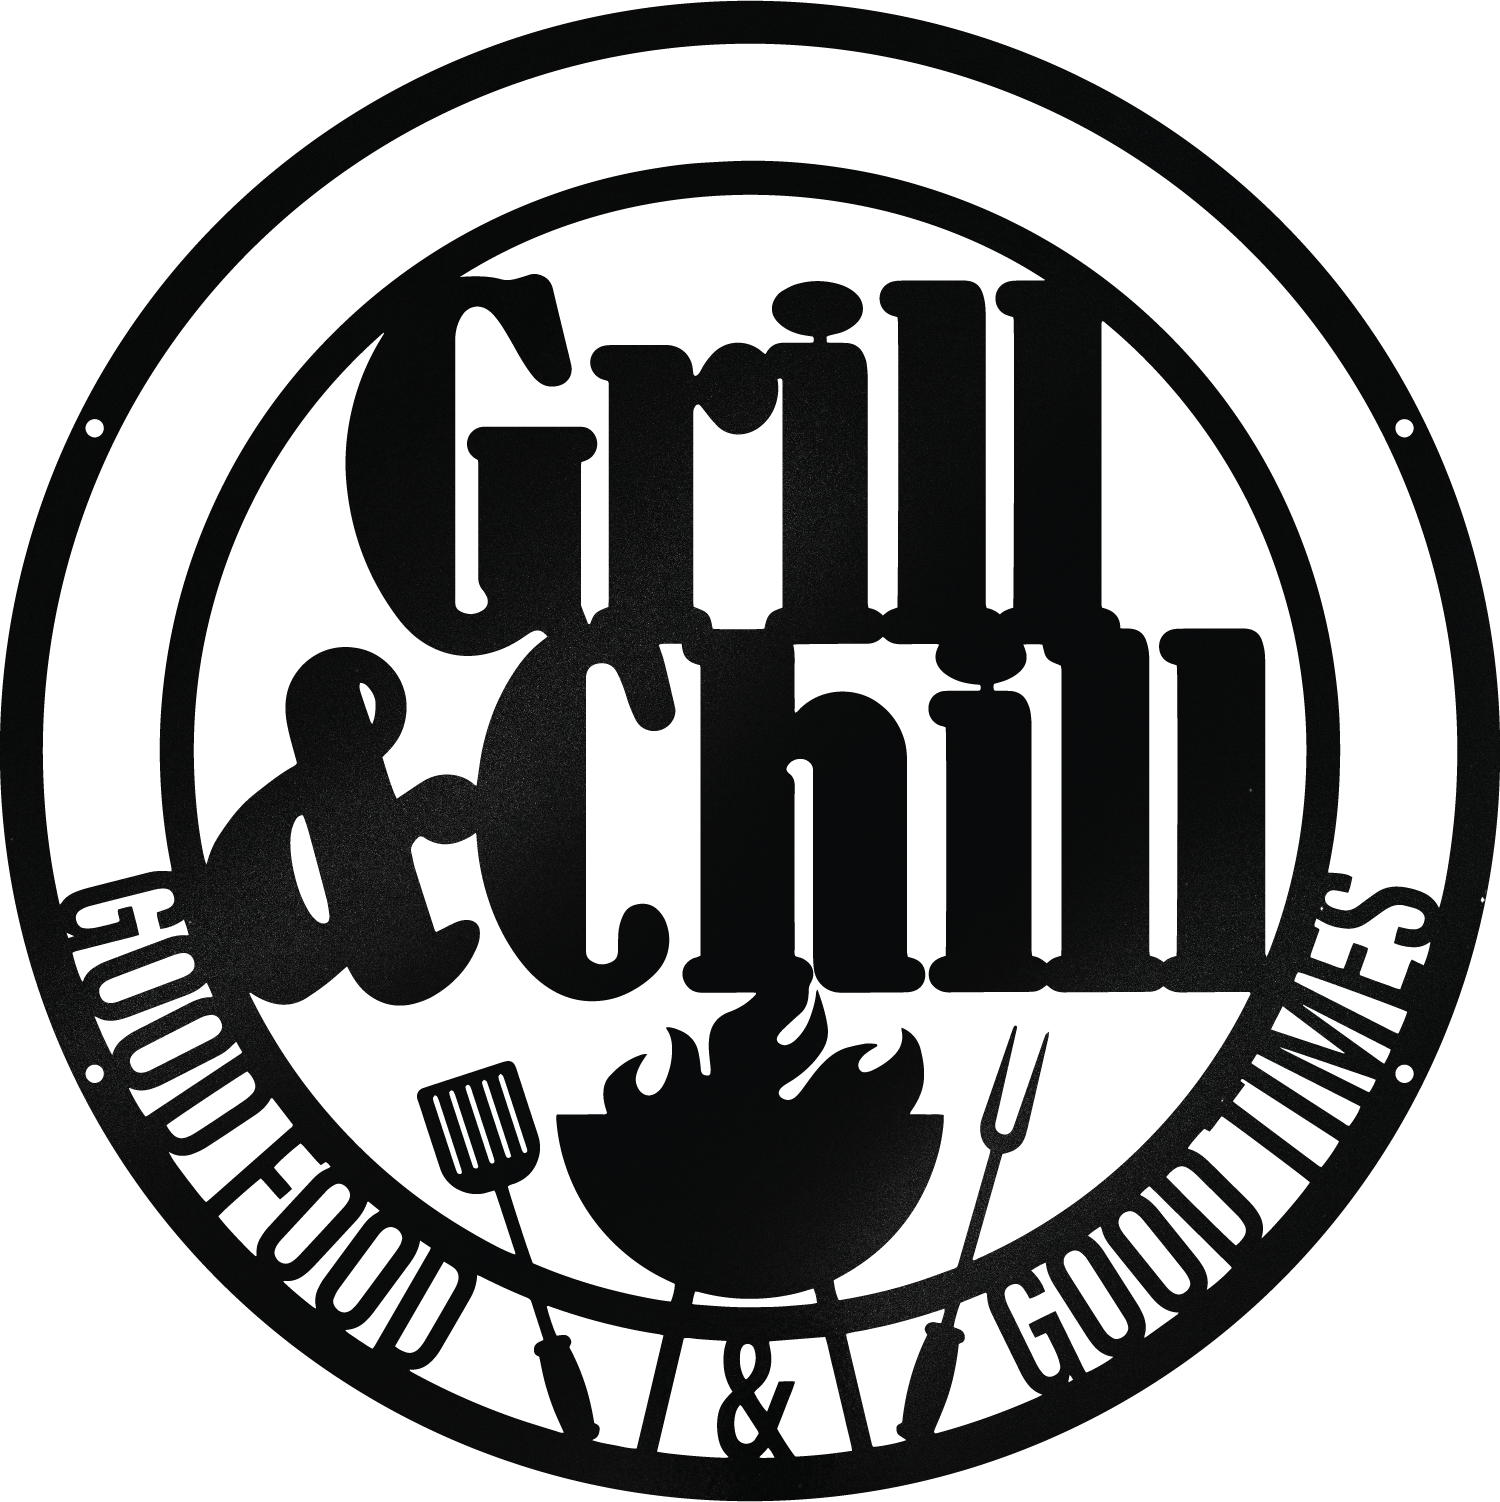 Grill & Chill Personalized Sign